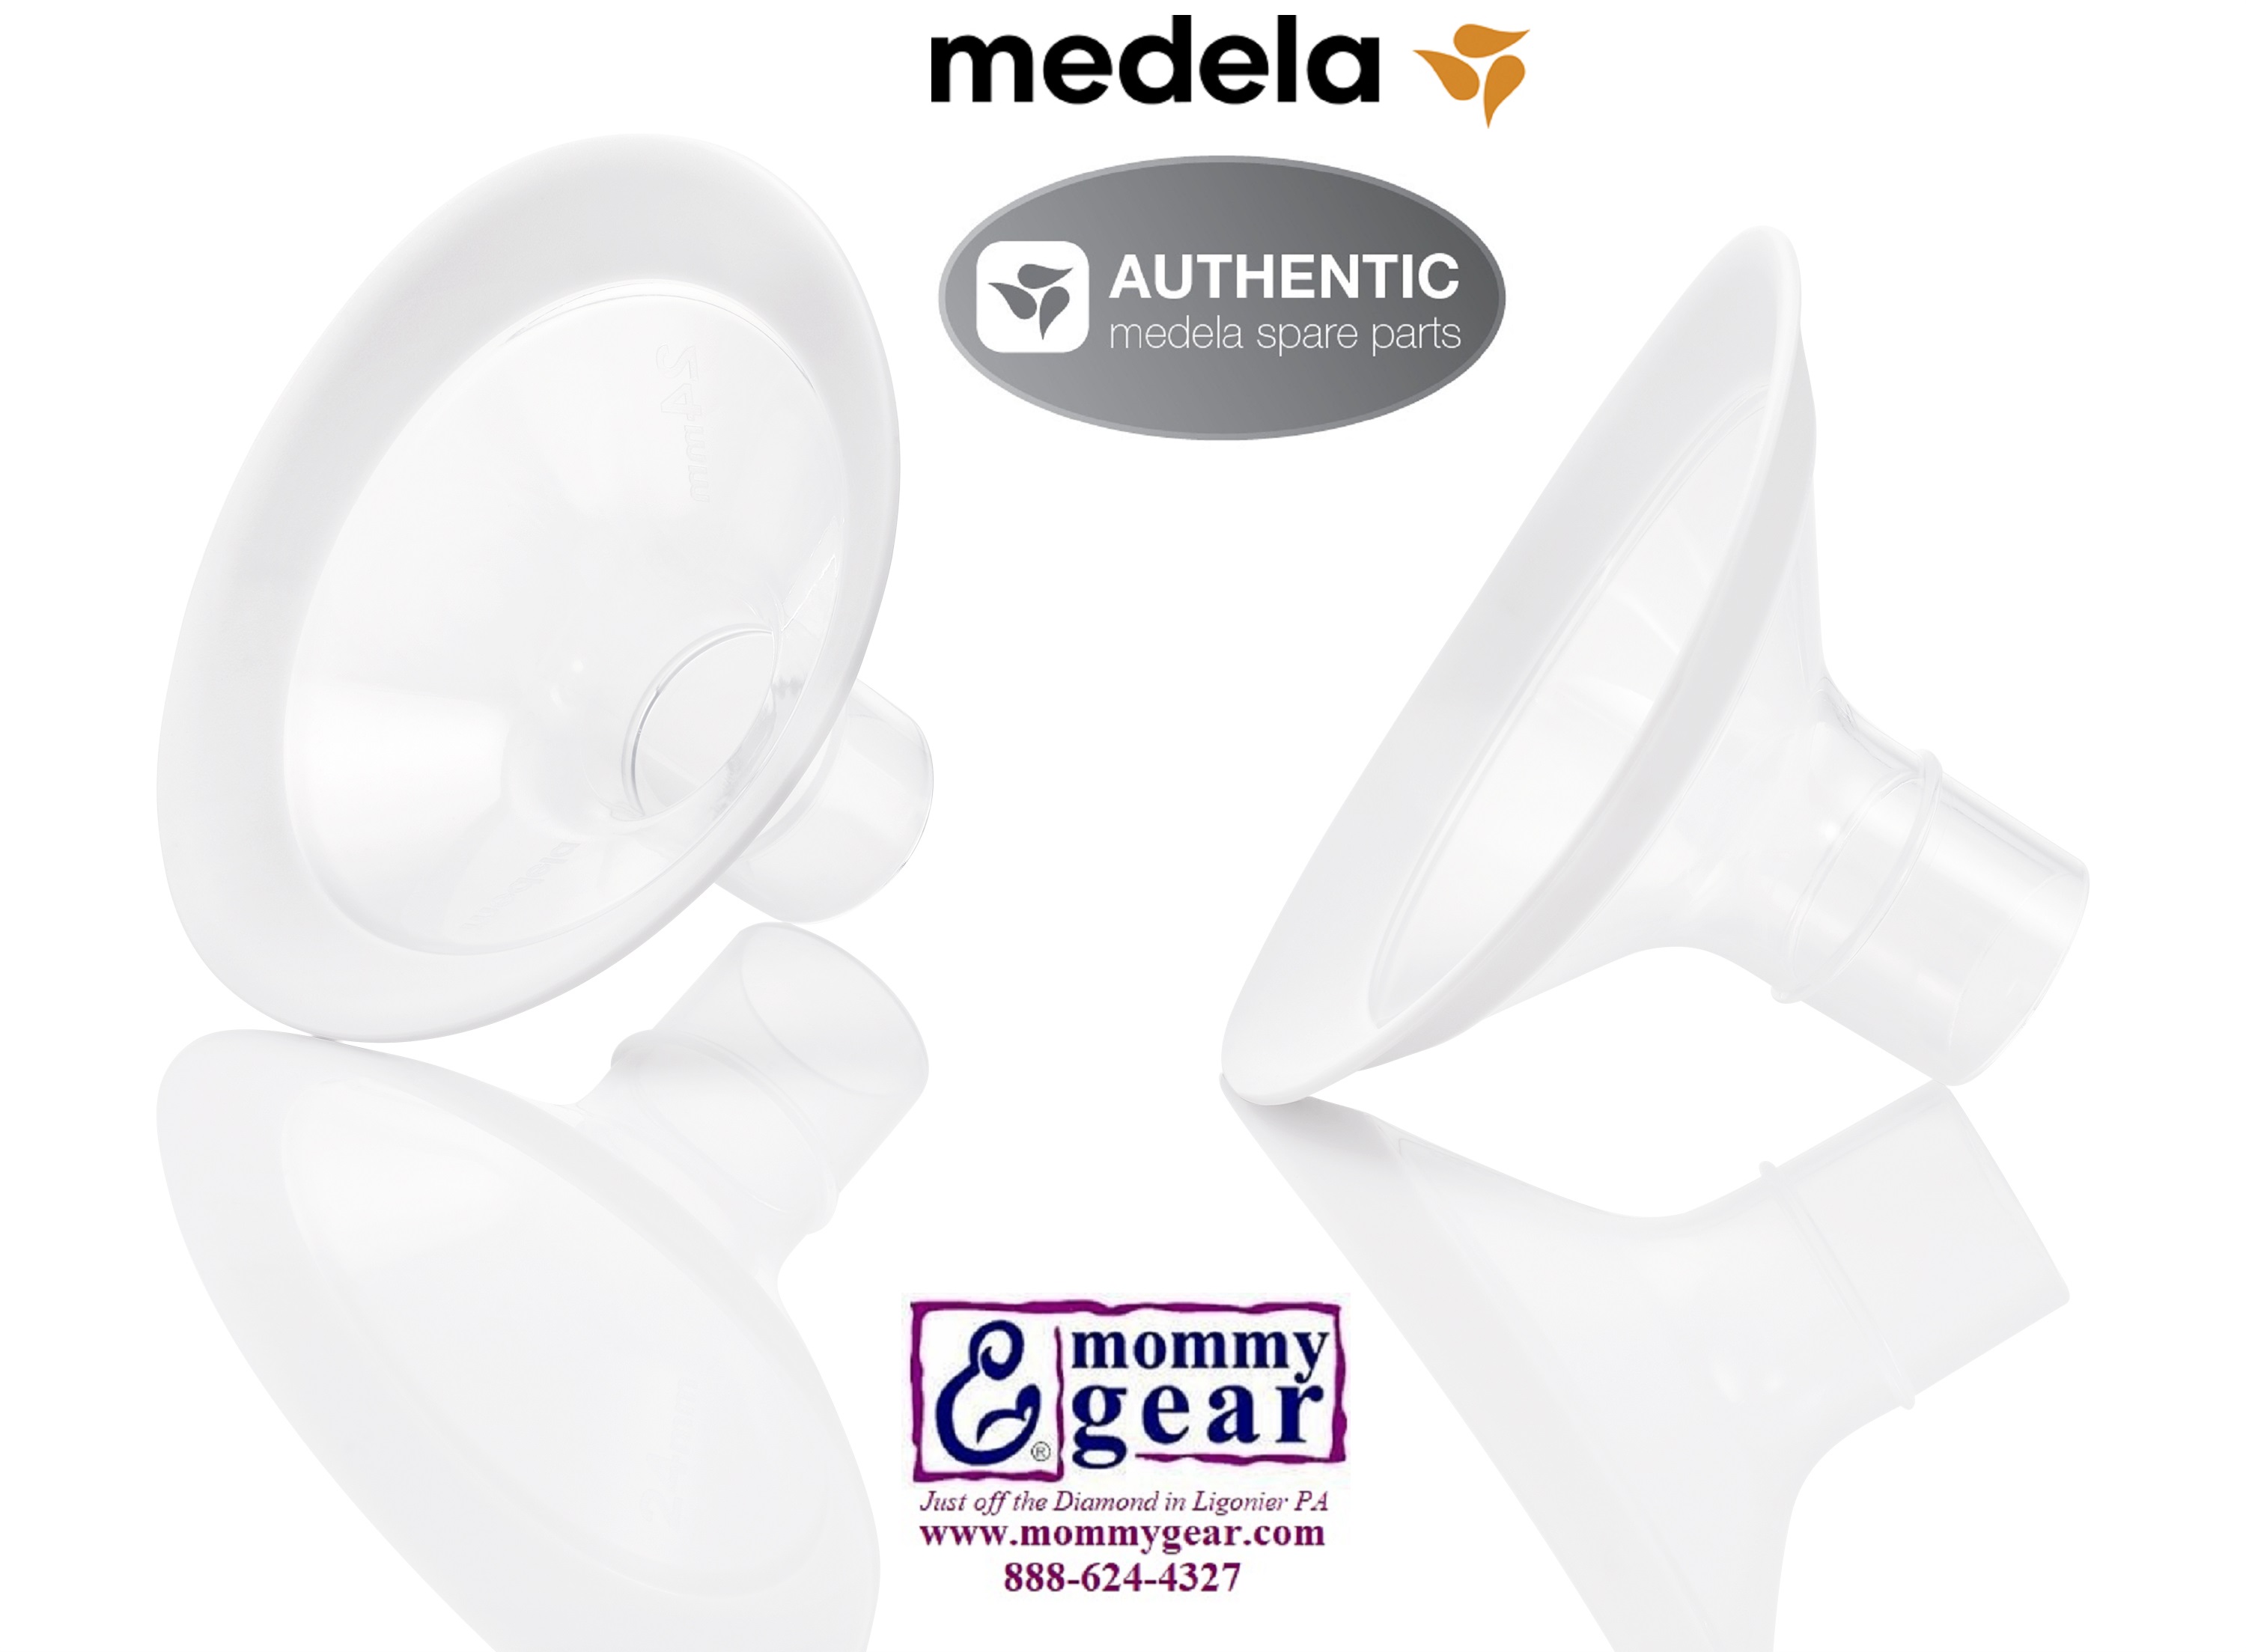 Medela PersonalFit Flex Breast Shields, 2 Pack of Small 21mm Breast Pump  Flanges, Made Without BPA, Shaped Around You for Comfortable and Efficient